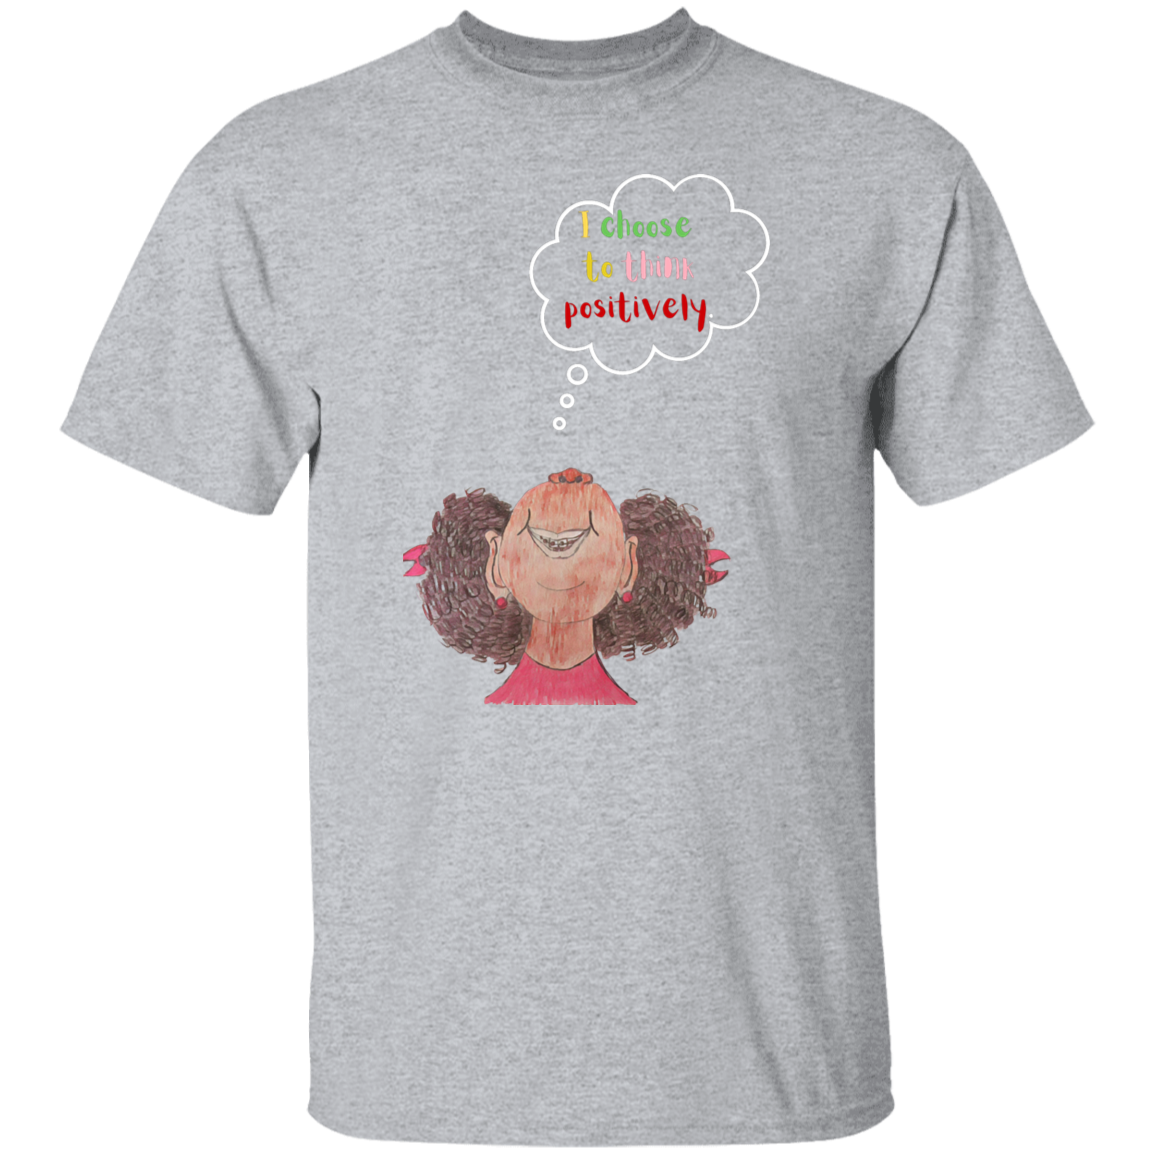 I choose to think positively Youth 5.3 oz 100% Cotton T-Shirt